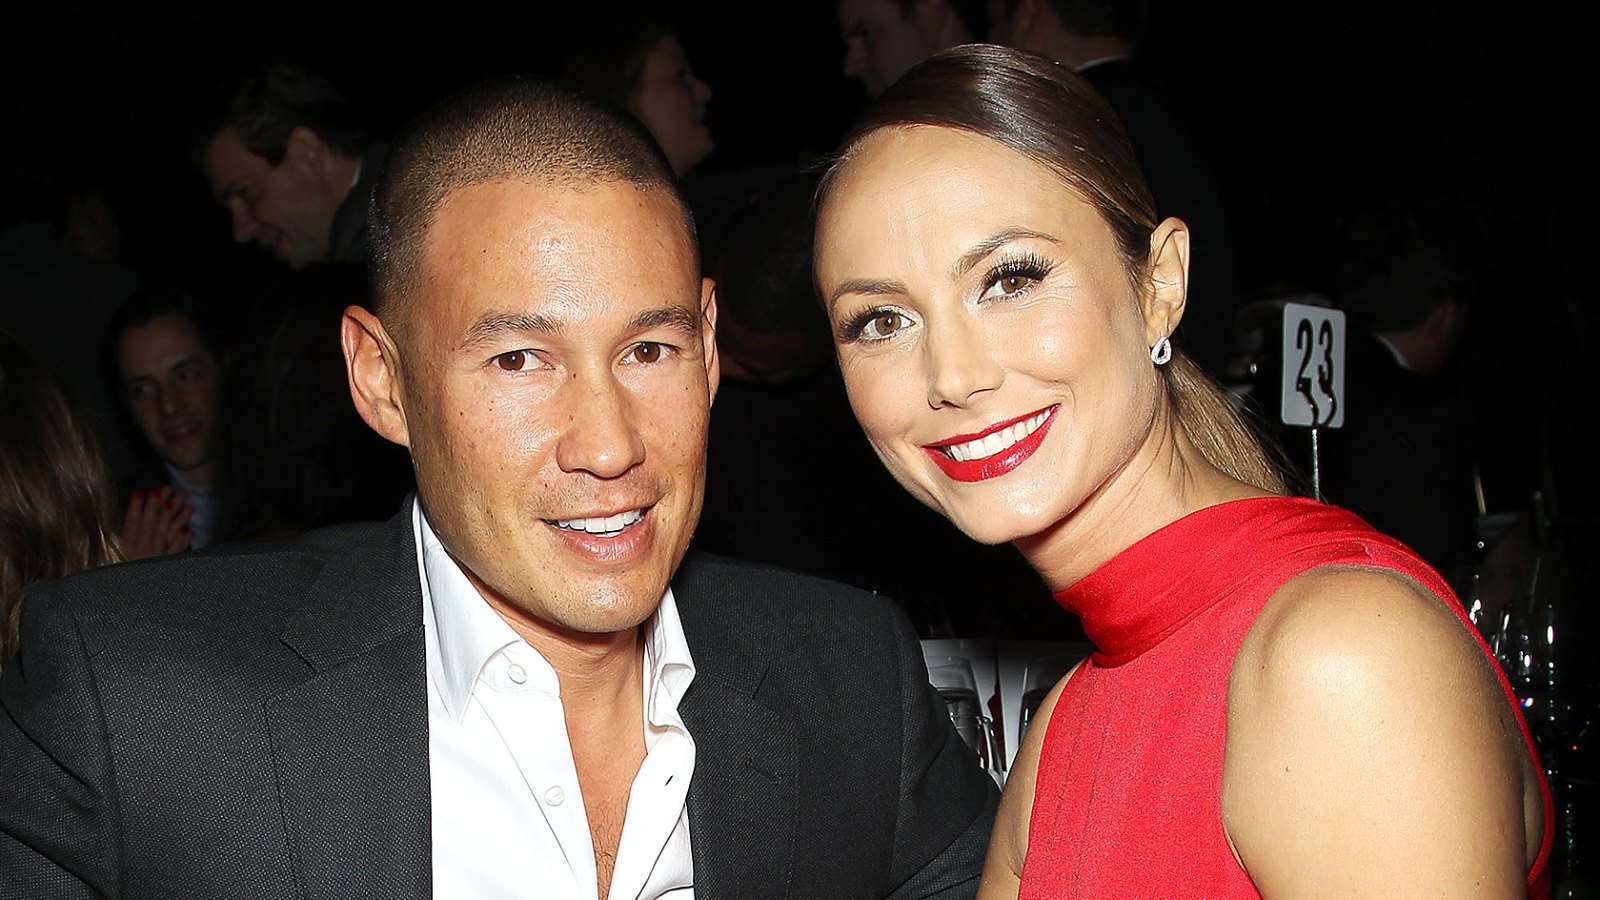 Stacy-Keibler-Jared-Pobre-expecting-baby-pregnant